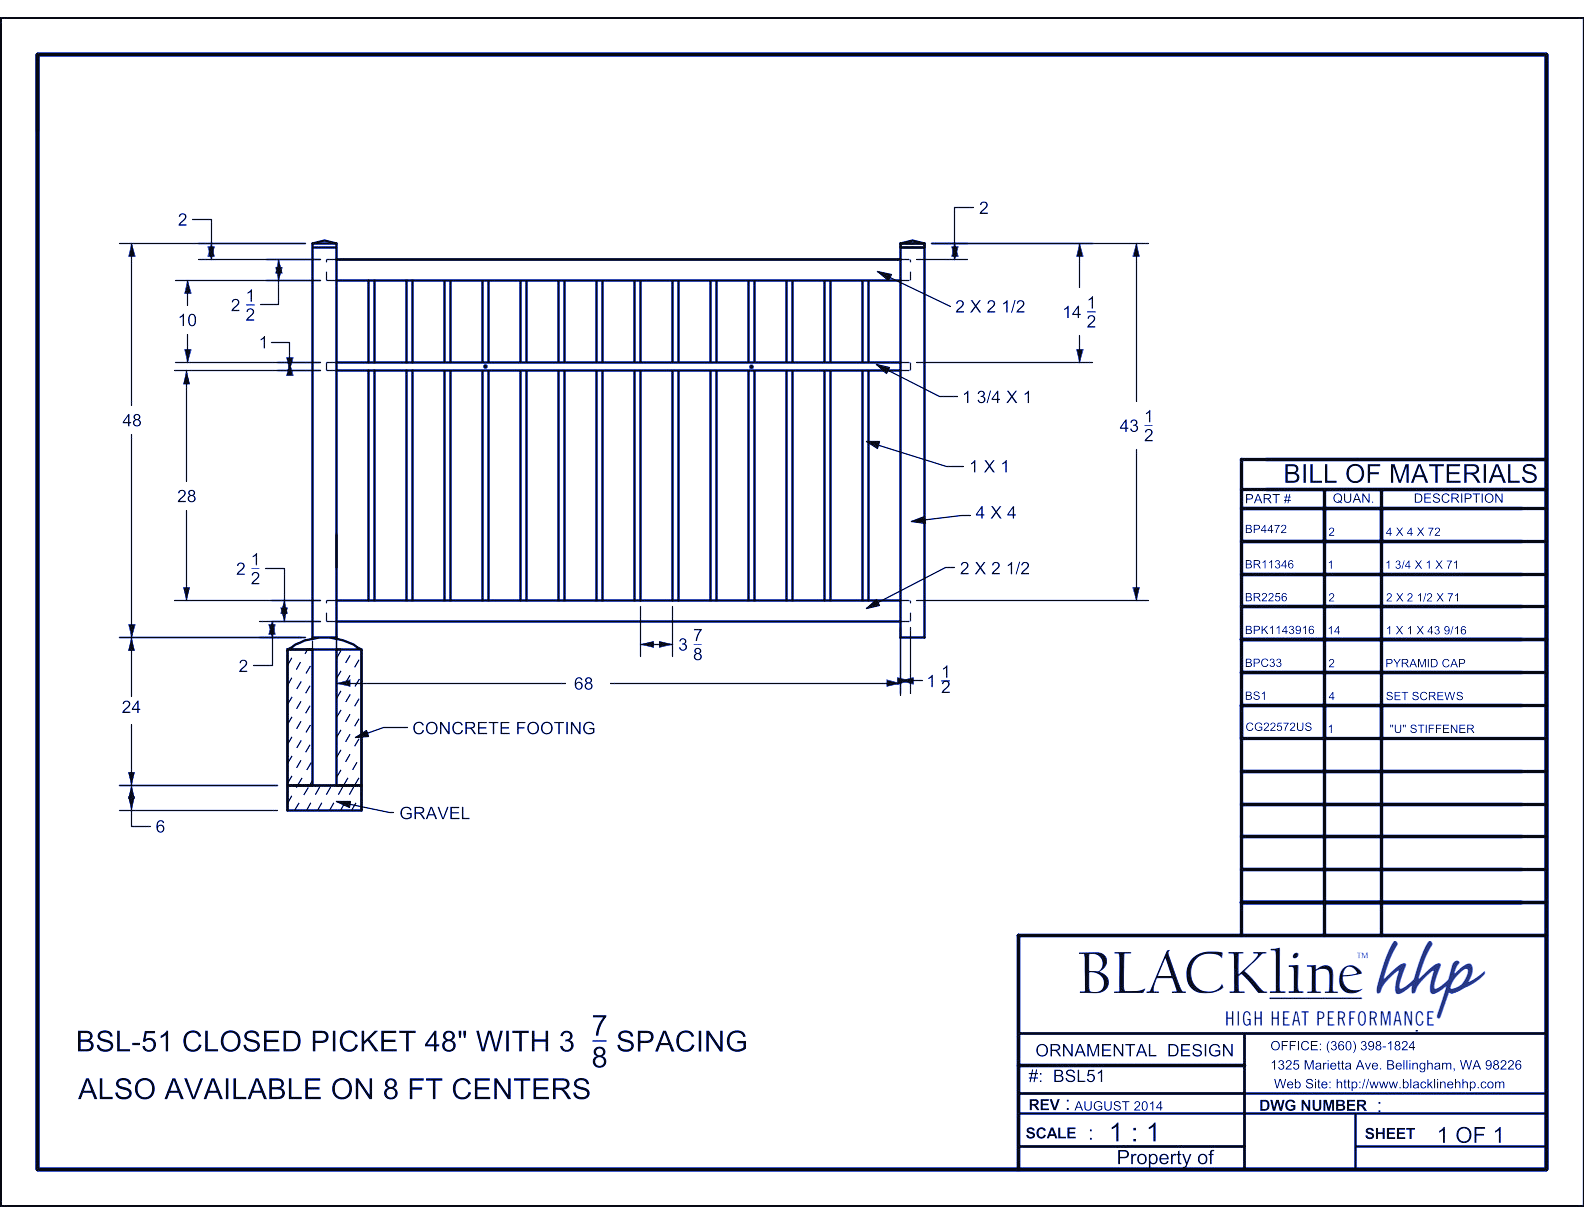 BSL-51: Closed Picket 48" with 3 7/8” Spacing - Also Available on 8 Ft. Centers